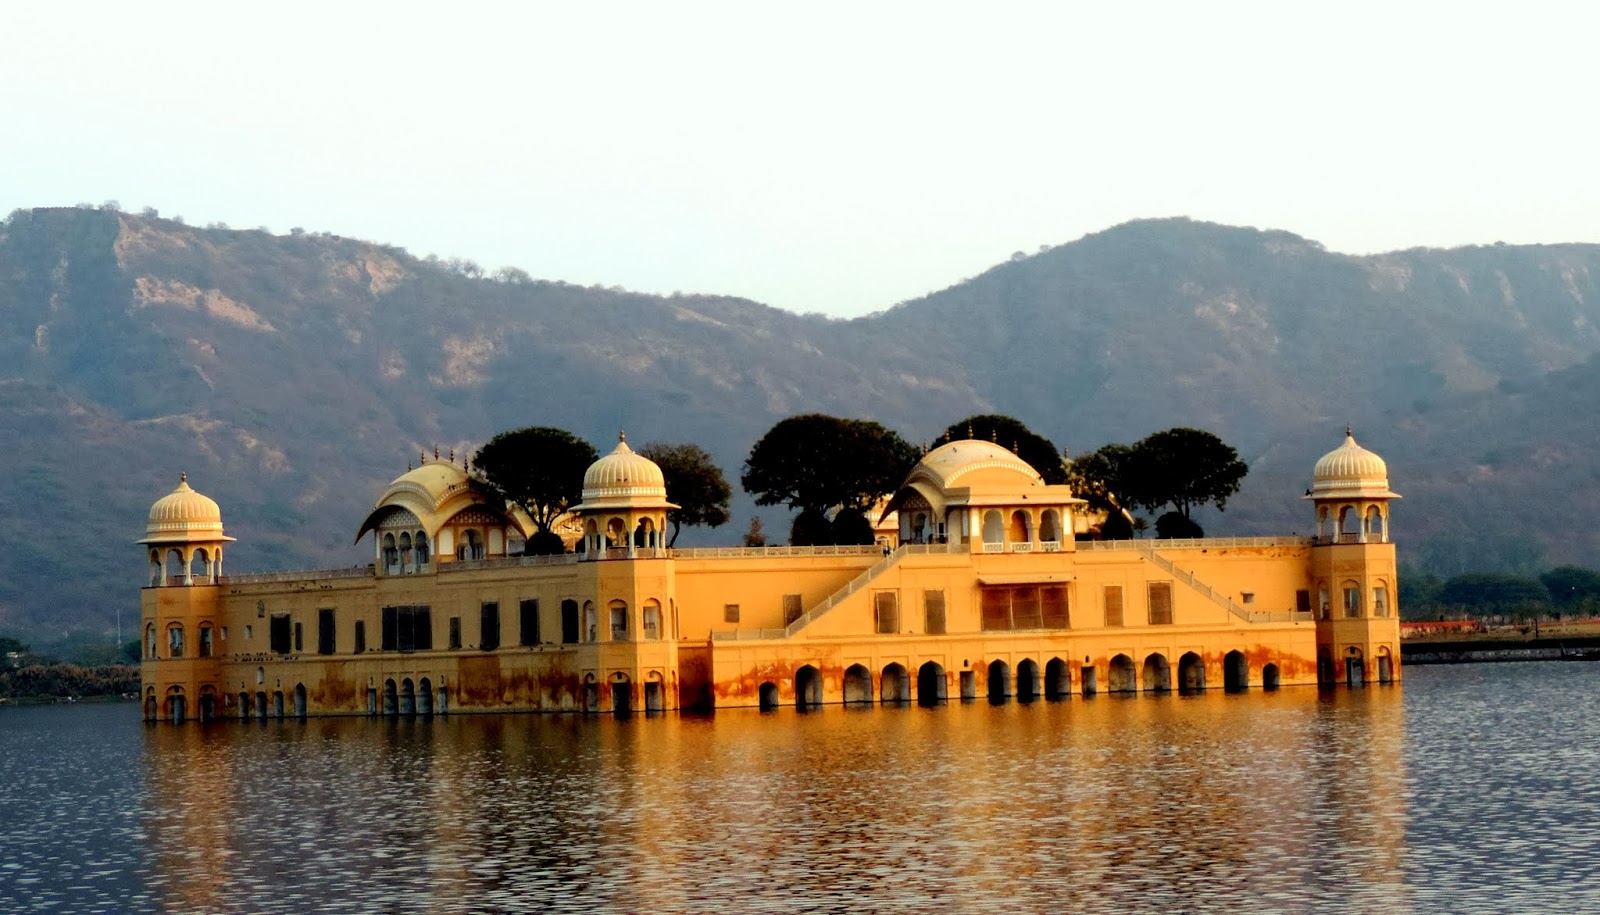 After watching this video you will be forced to leave the Pink City of Jaipur!